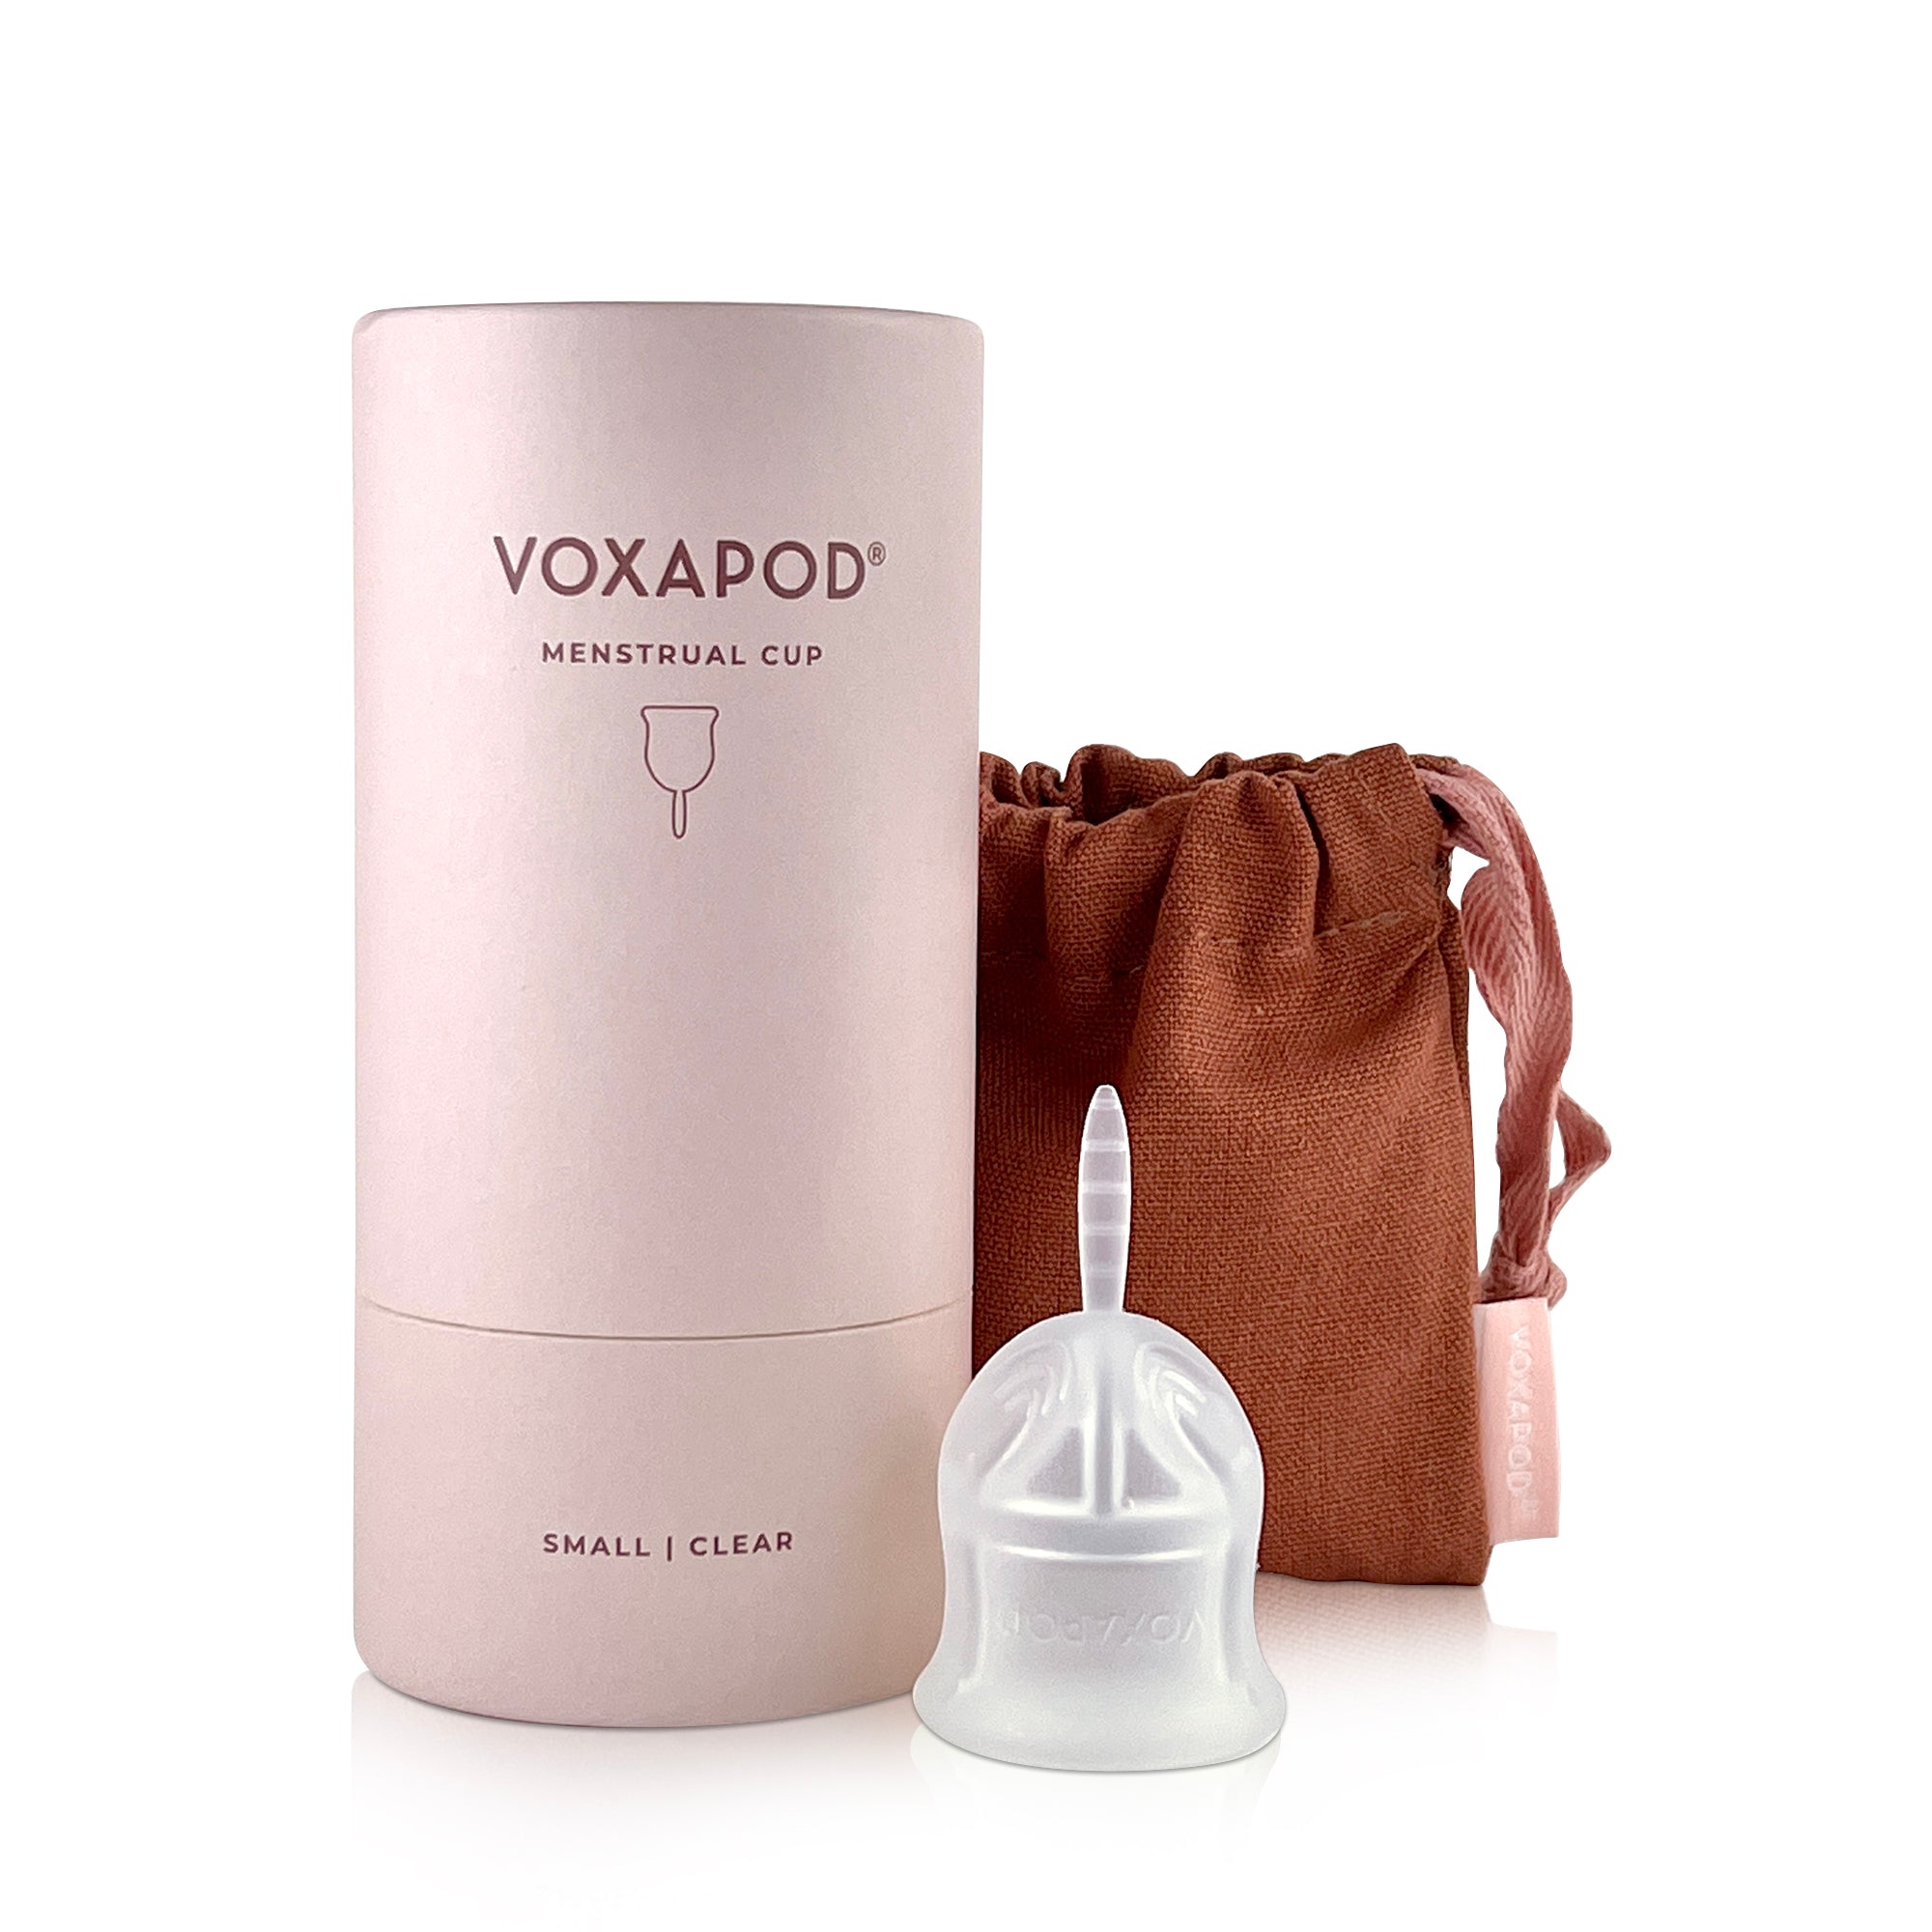 Best menstrual cup after C-section